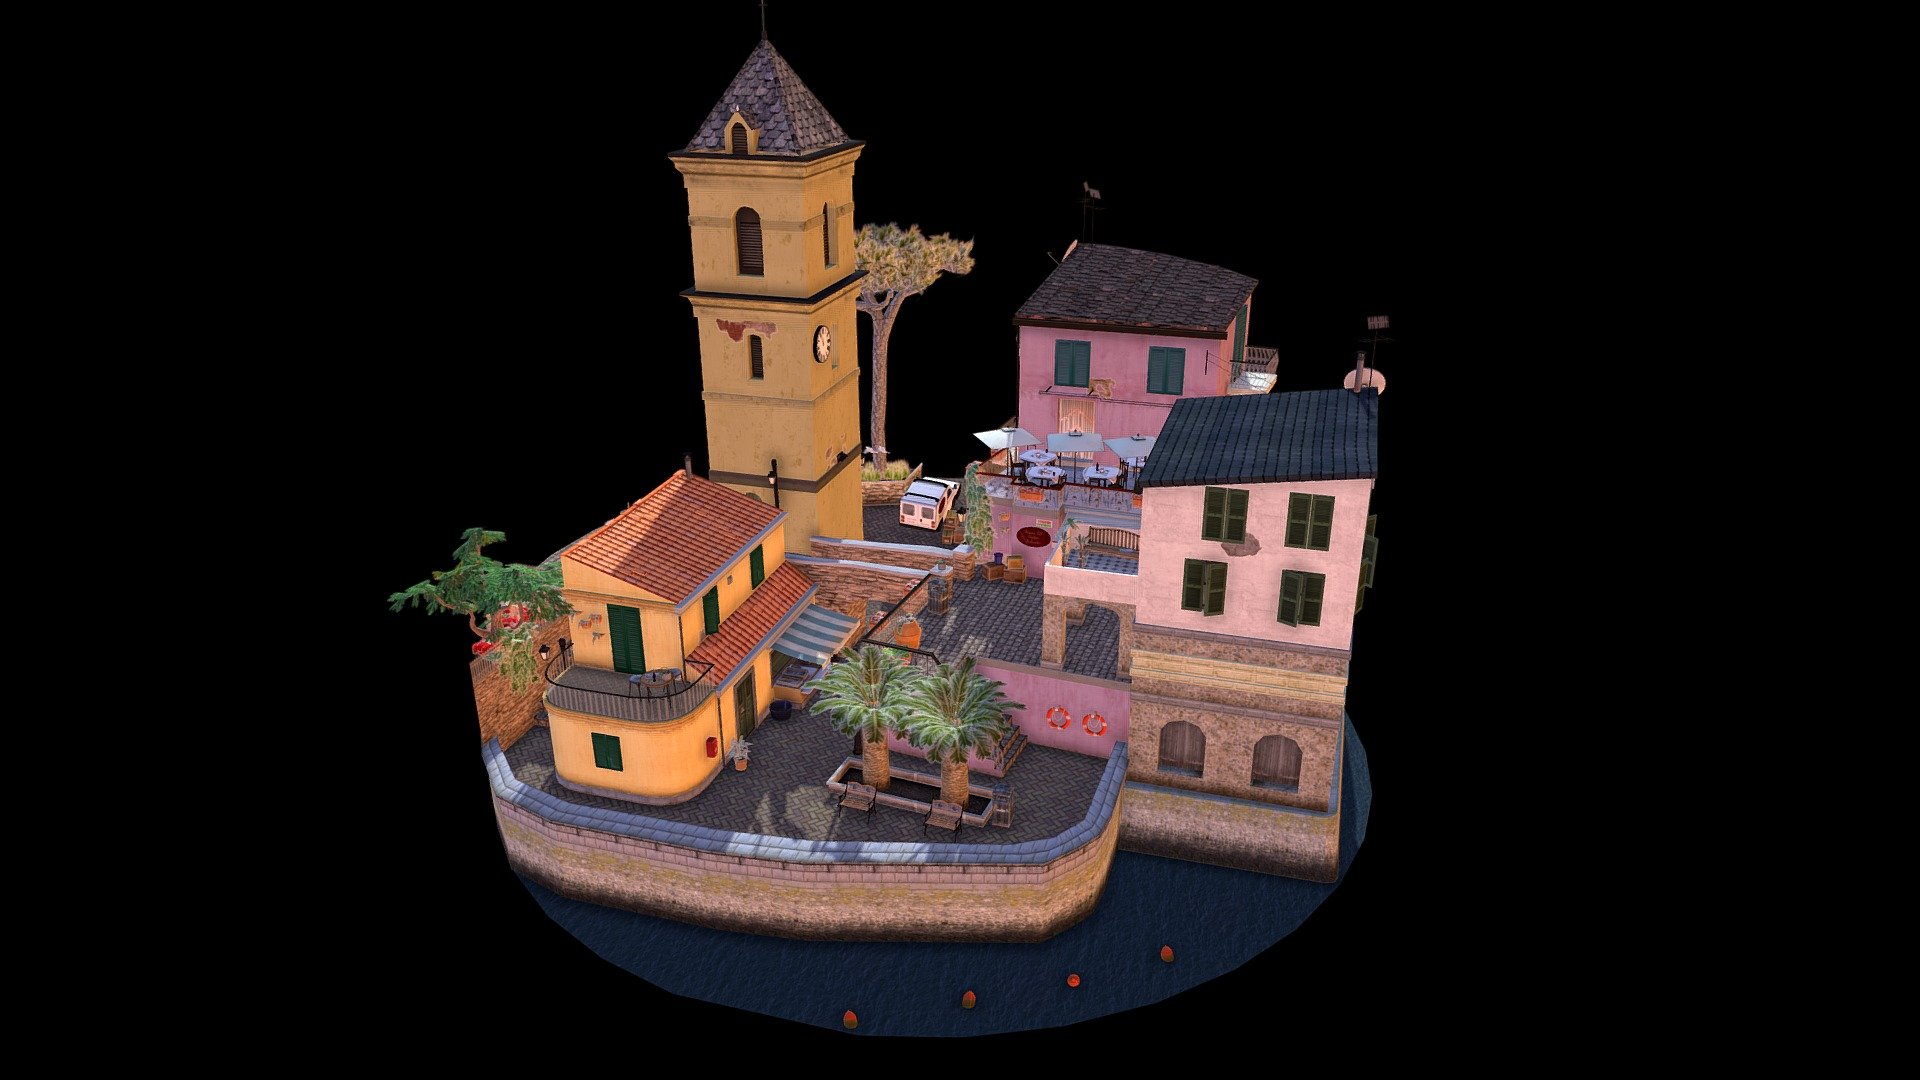 3D Low-poly assignment. Made my interpretation of the village Manarola in Italy, one of the five villages of Cinque Terre. Made in 3DSMax, textured in Photoshop 3d model